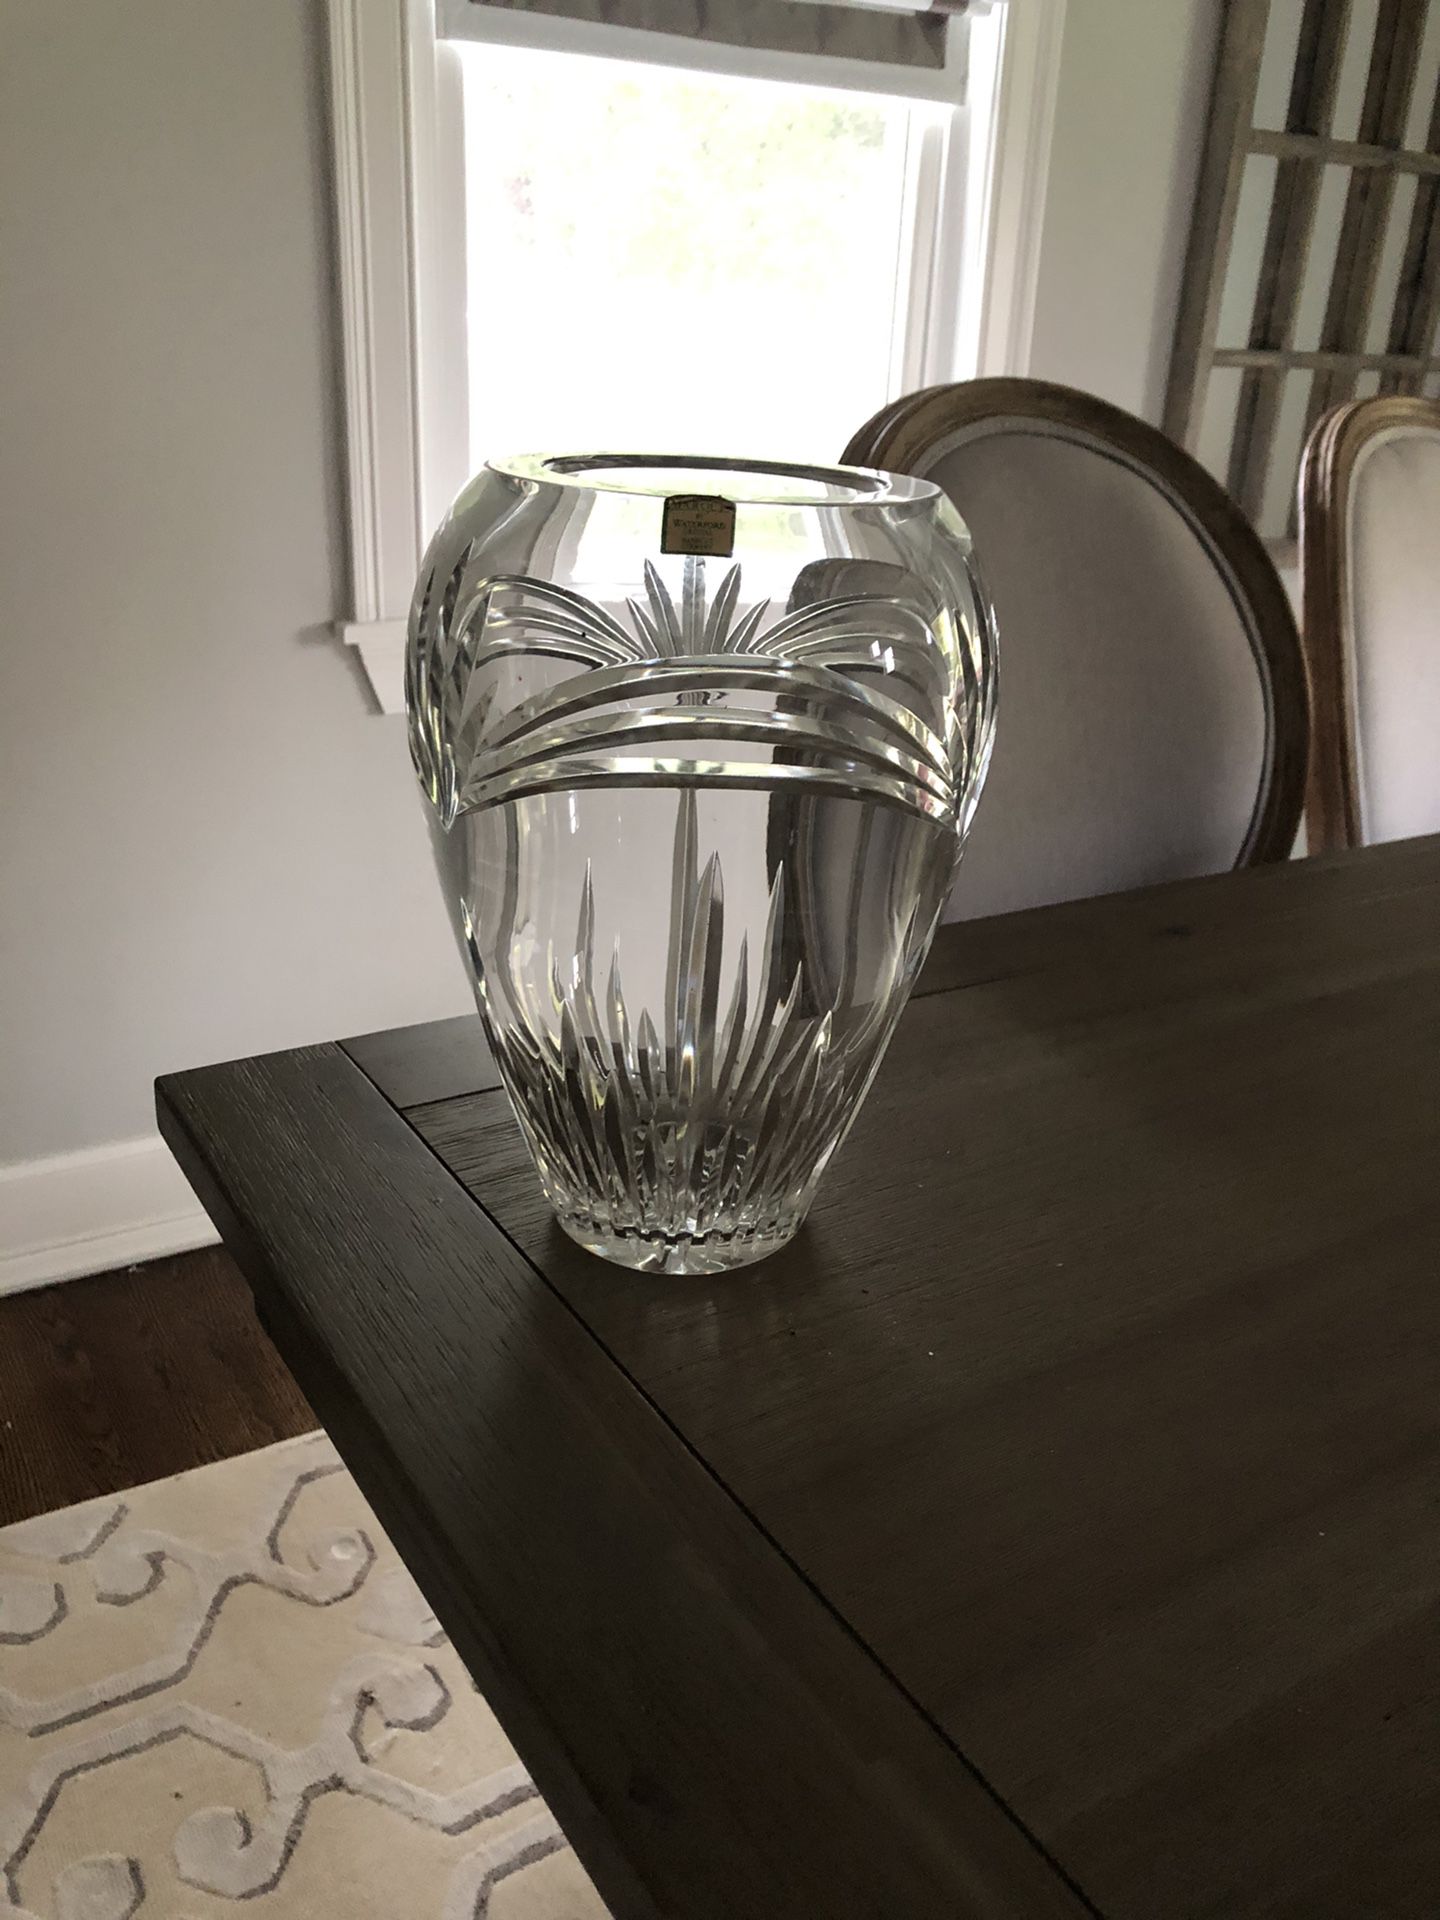 Marquis  “Calais” Waterford crystal vase